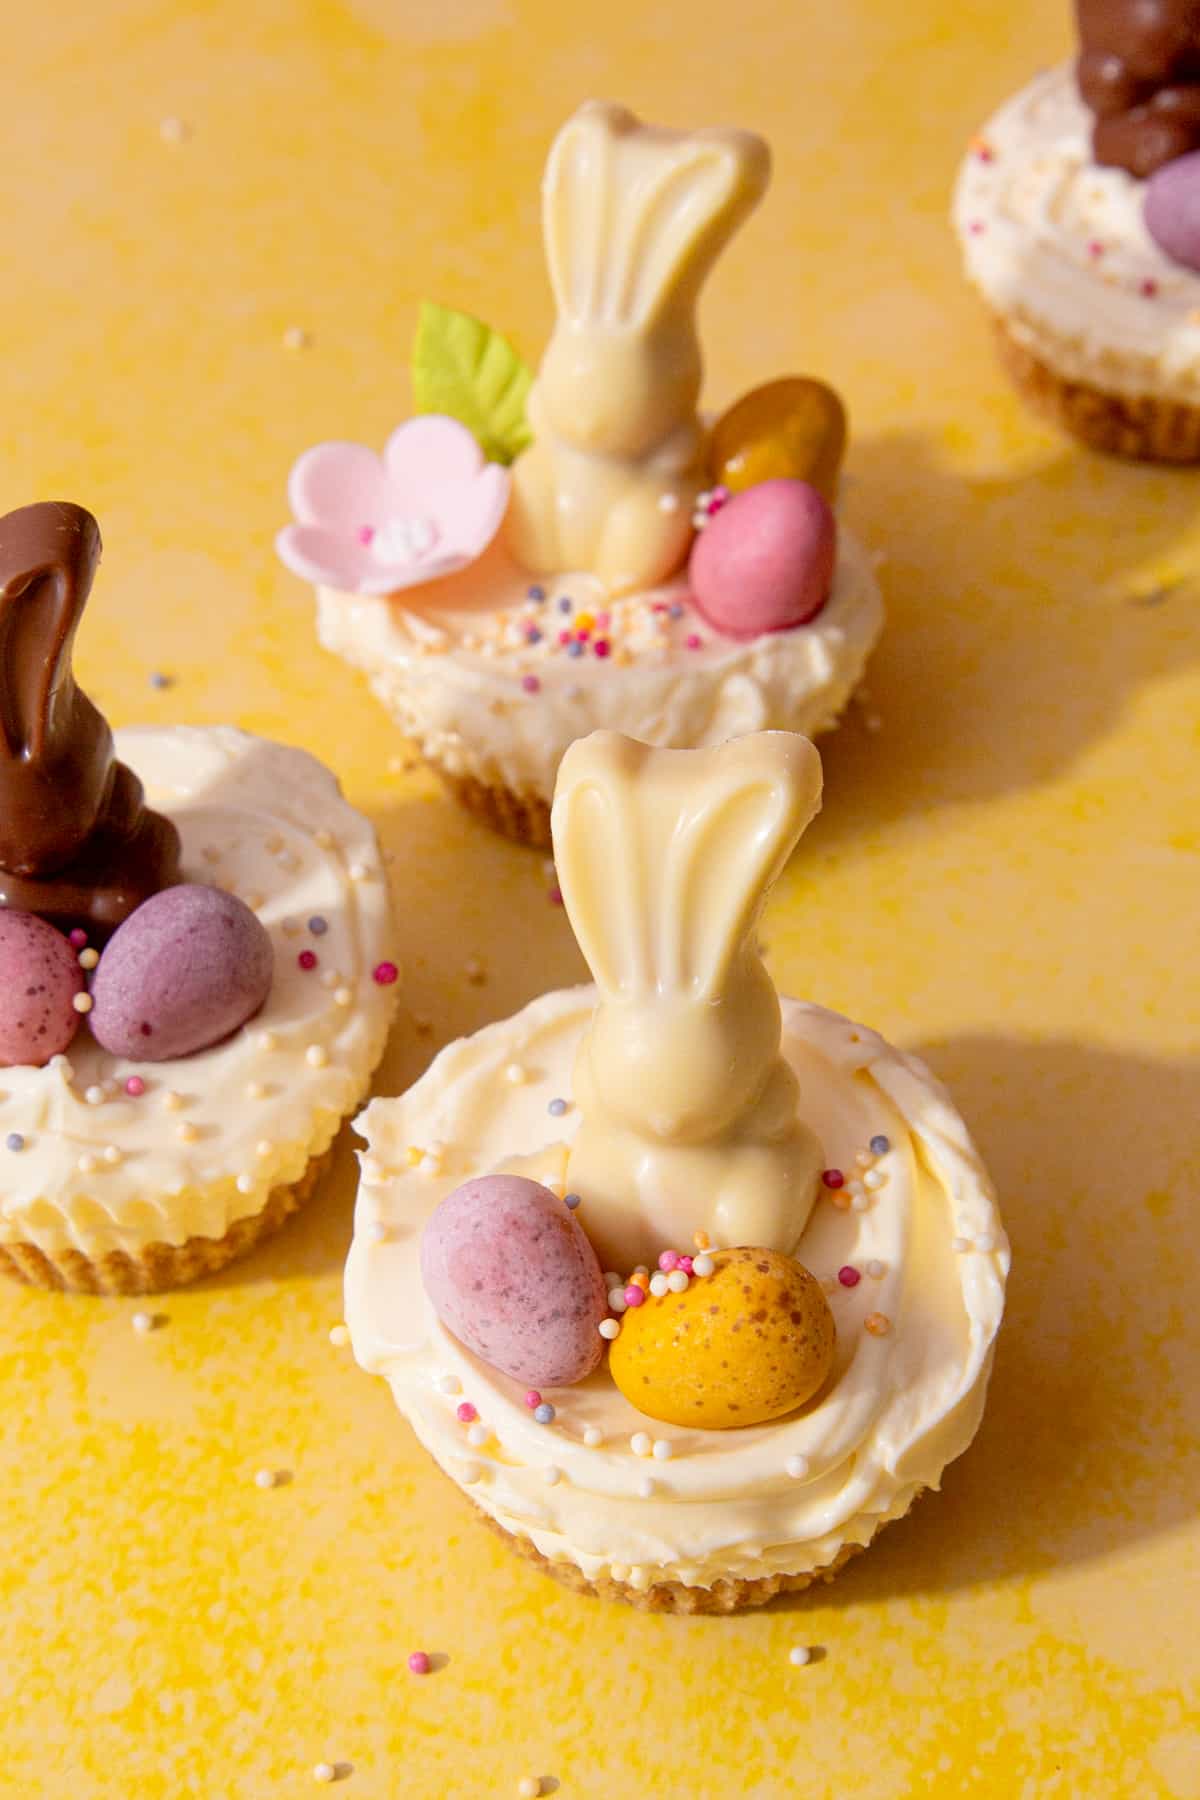 Mini cheesecakes decorated with both milk and white chocolate Easter bunnies, flowers and sprinkles on a yellow background.